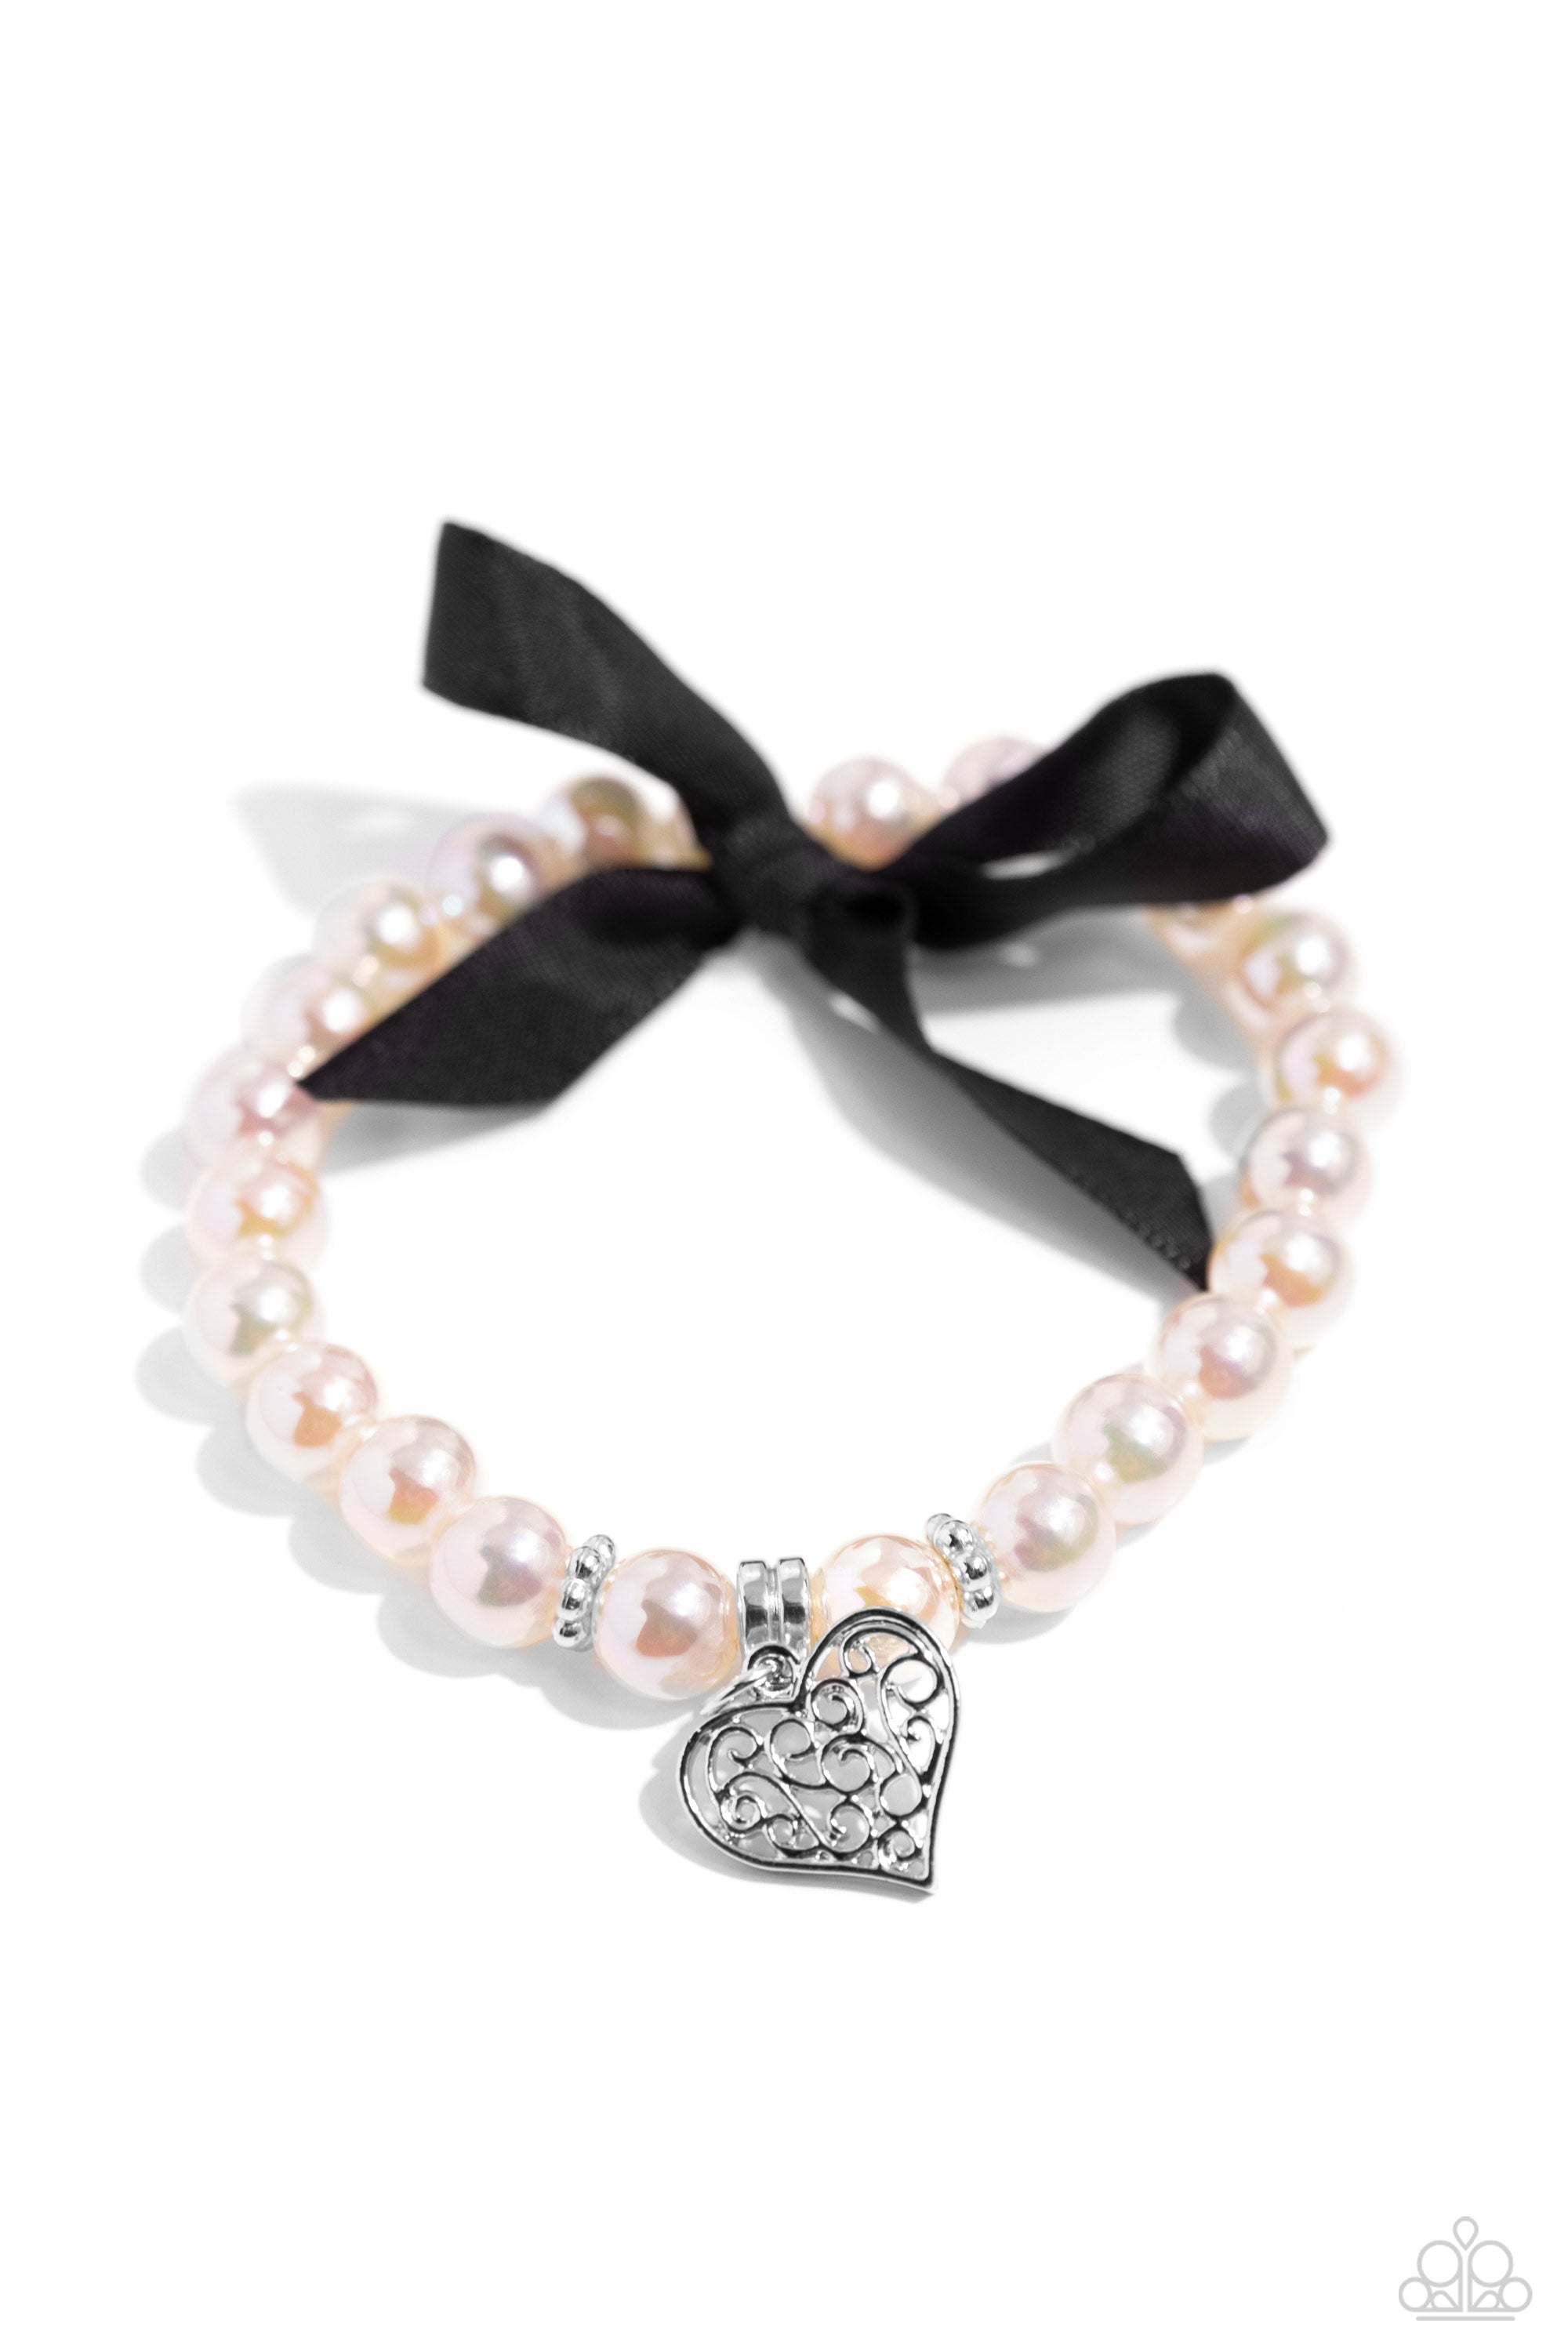 Prim and Pretty Black Bow & Iridescent Pink Pearl Bracelet - Paparazzi Accessories- lightbox - CarasShop.com - $5 Jewelry by Cara Jewels